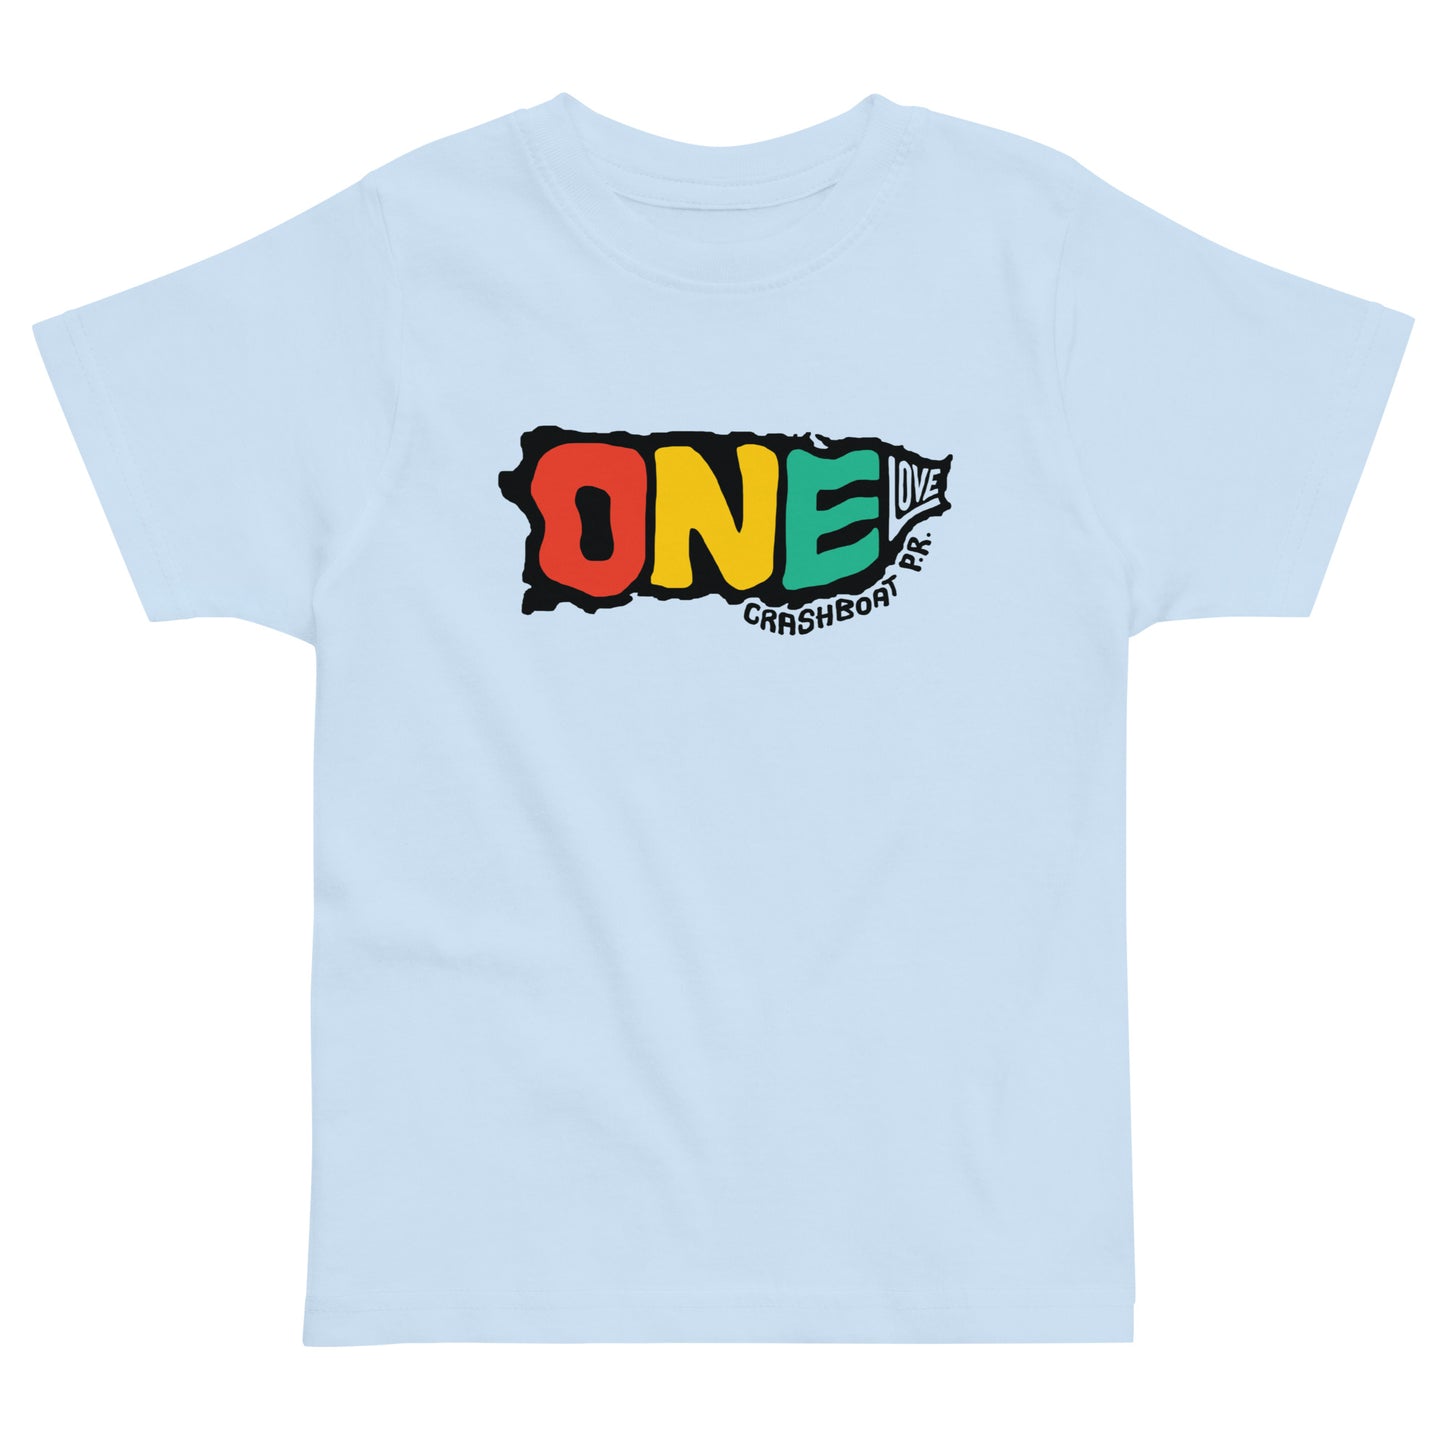 One Love Toddler Tee